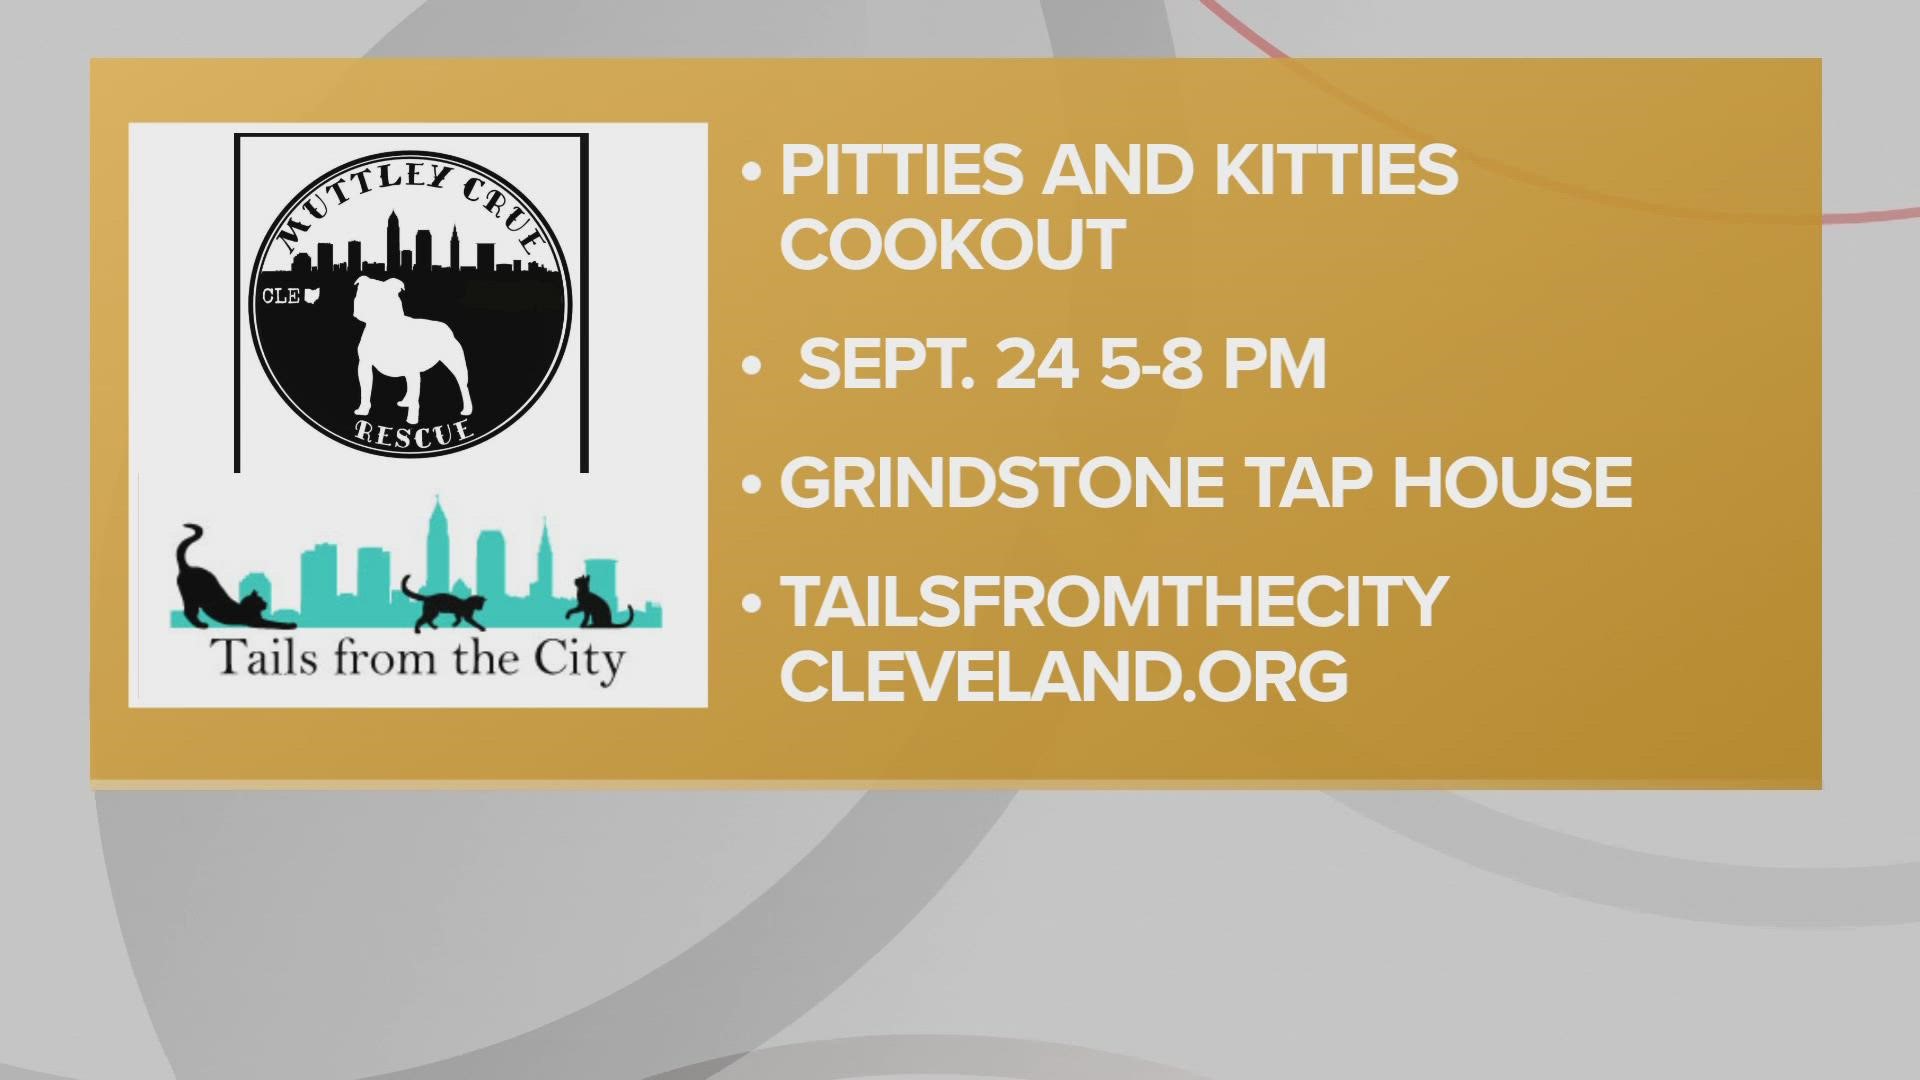 3News welcomed two kittens and a puppy into the studio for the Ready Pet Go! segment. Tails from the City and Muttley Crew Rescue are looking for people to adopt.